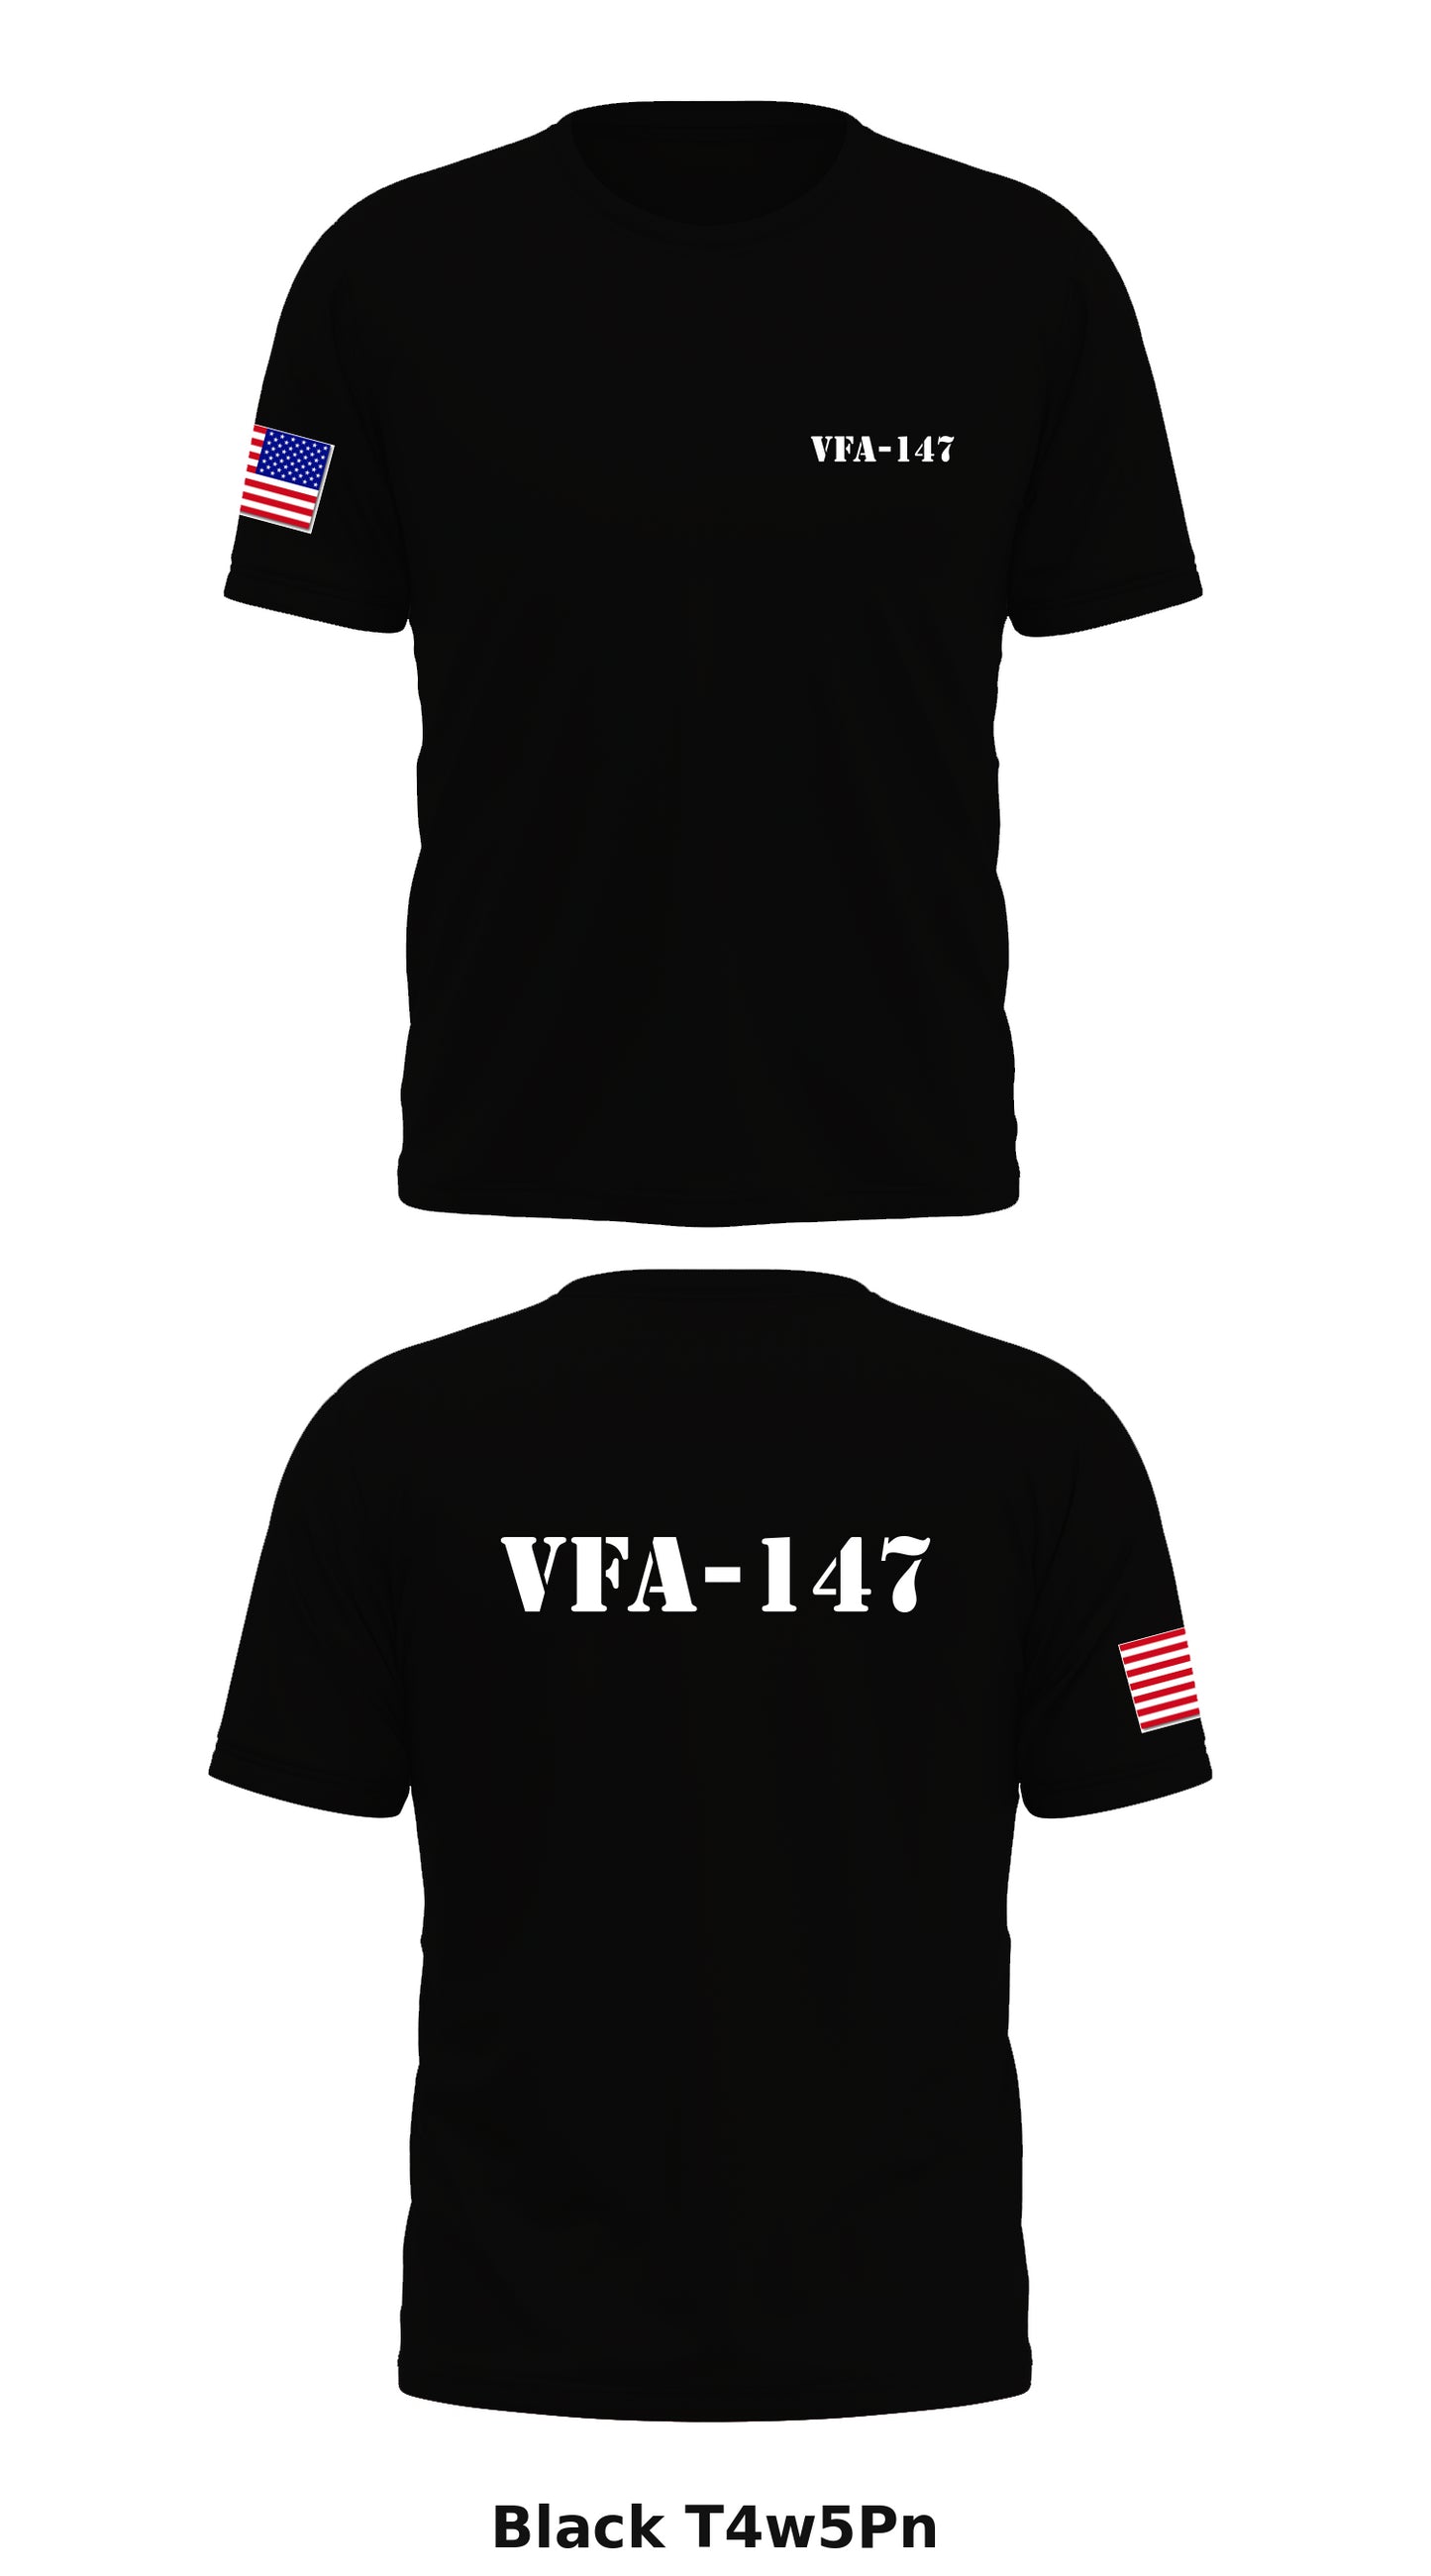 VFA-147 Store 1 Core Men's SS Performance Tee - T4w5Pn